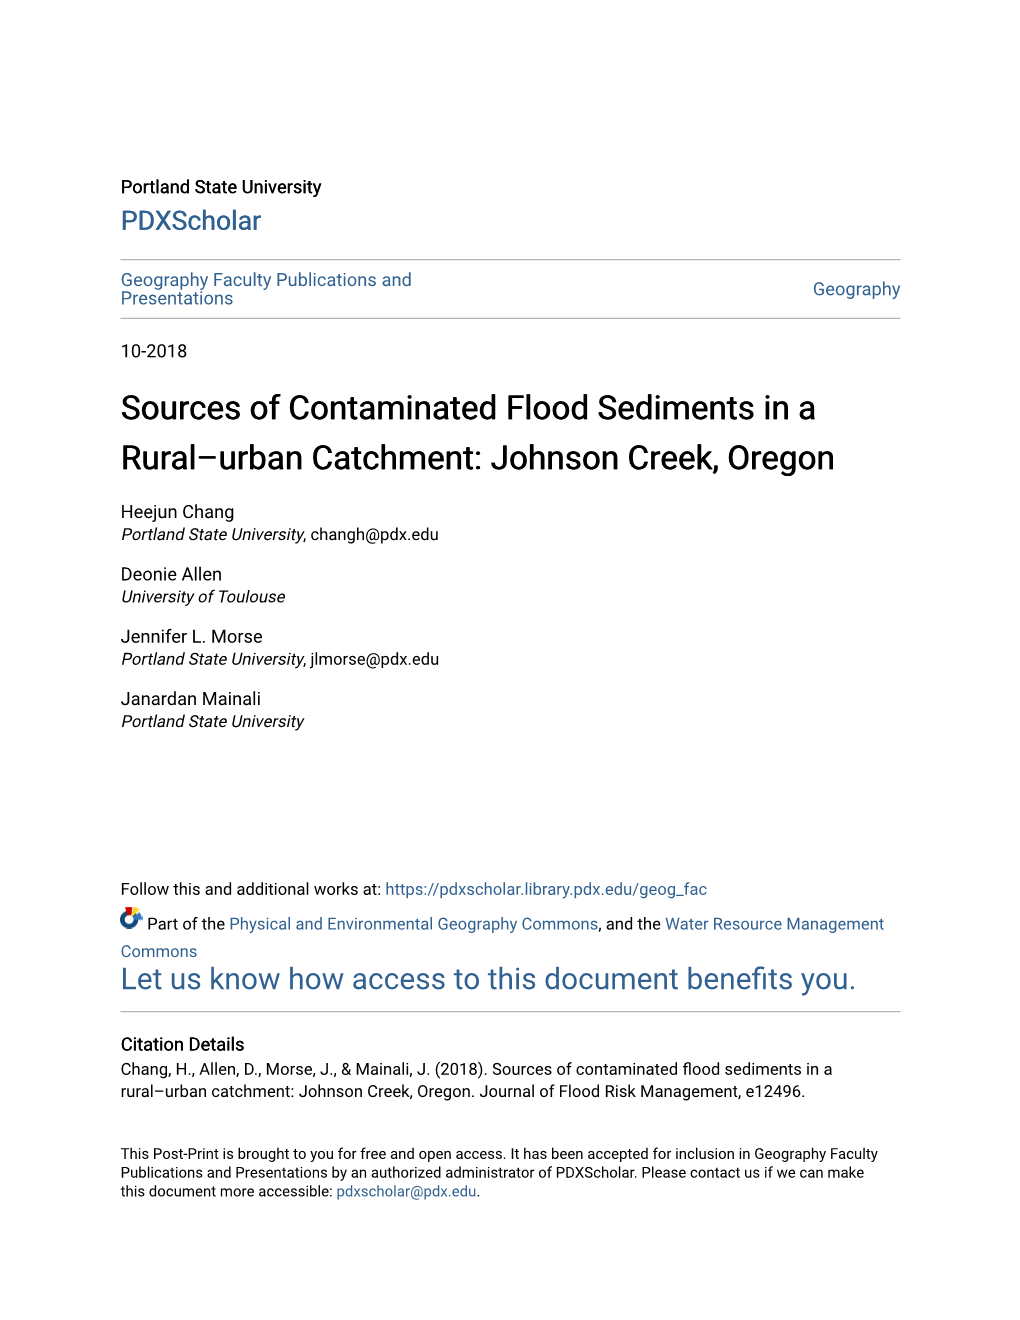 Sources of Contaminated Flood Sediments in a Rural–Urban Catchment: Johnson Creek, Oregon